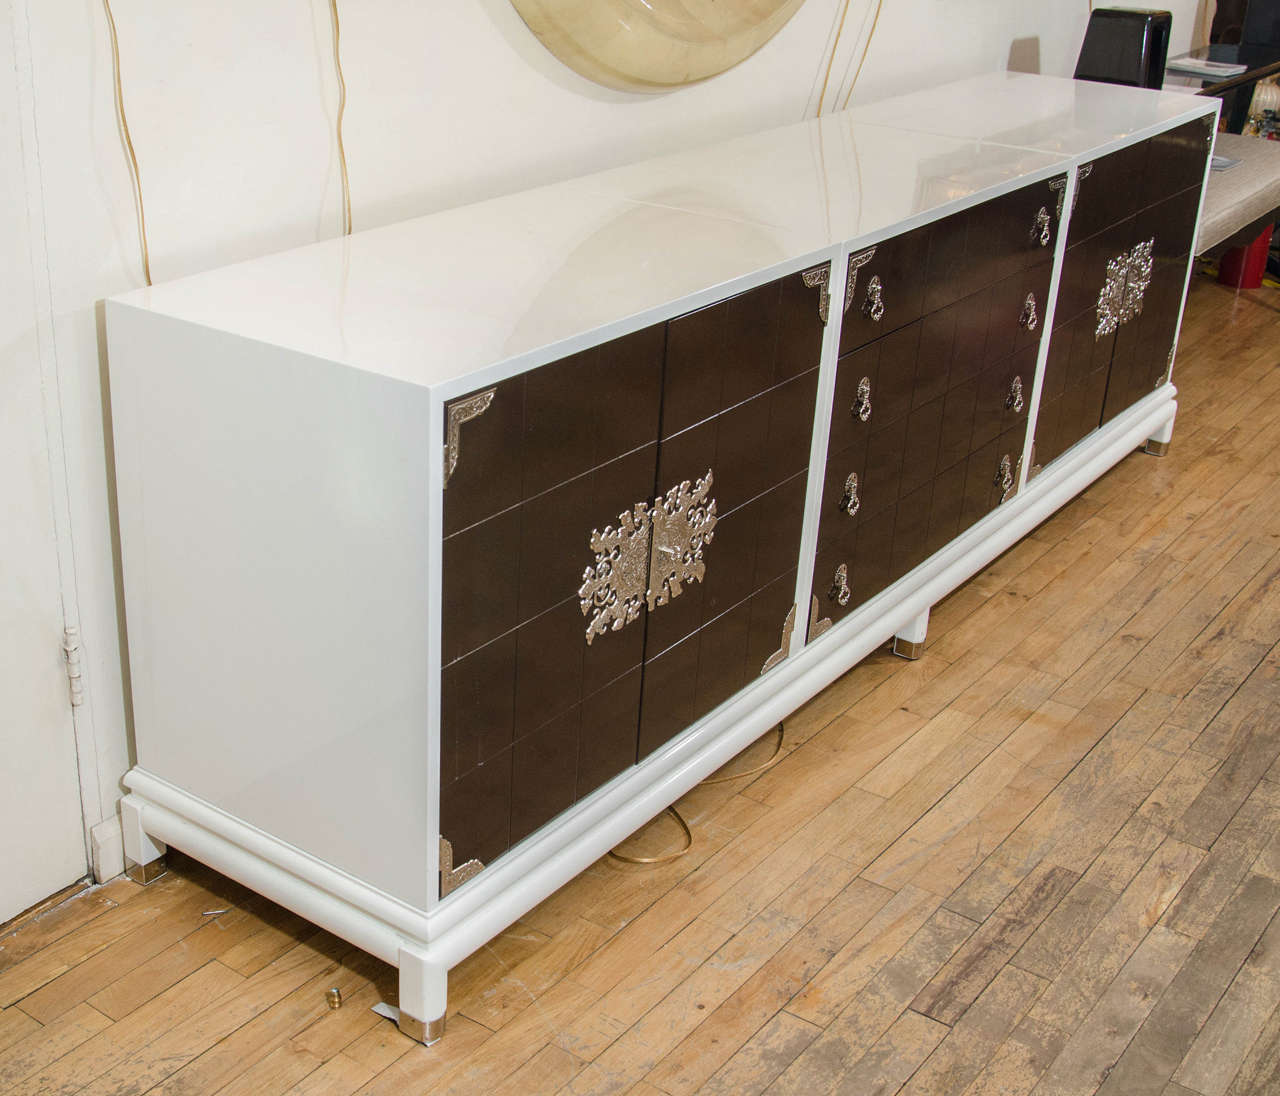 Asian inspired white lacquered wood sideboard with lacquered doors, drawers and decorative nickel hardware by Renzo Rutili.